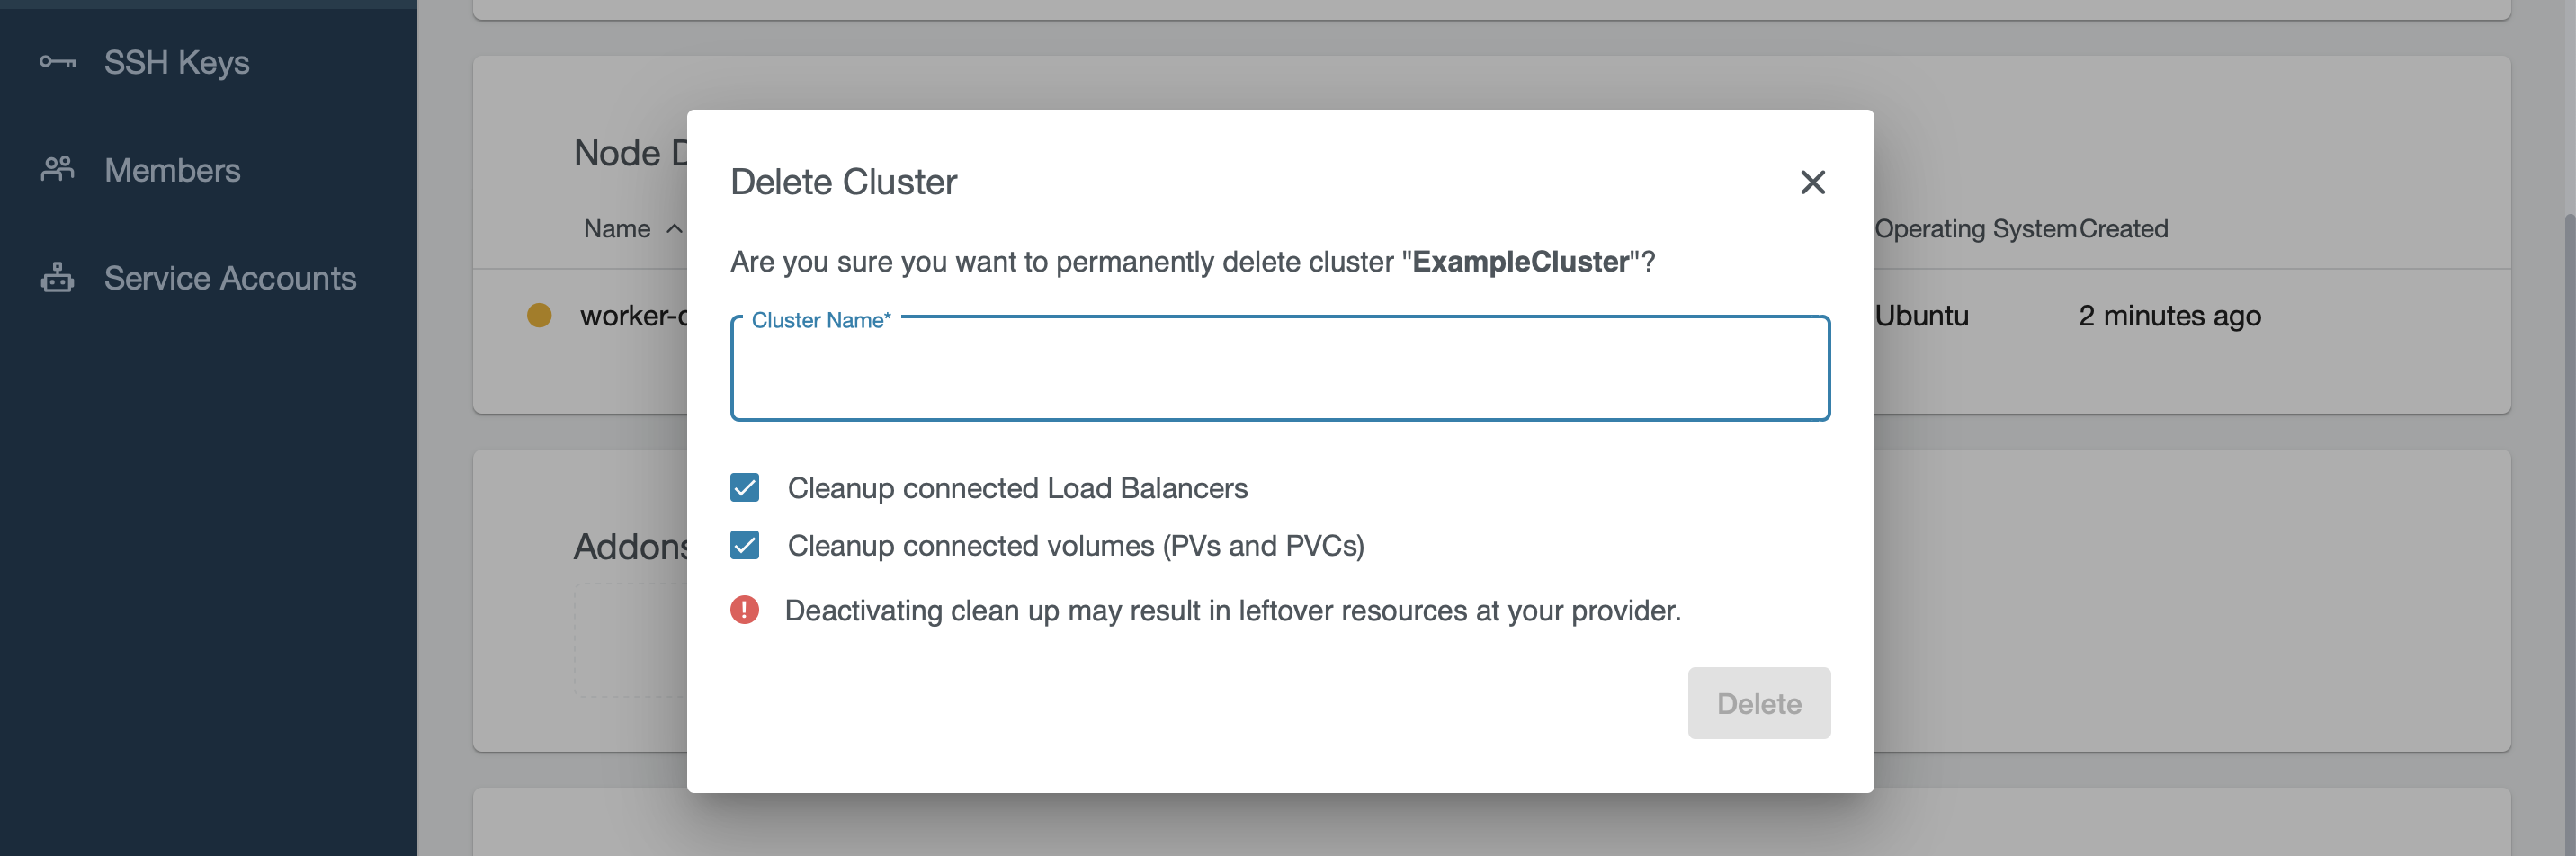 Confirmation dialog for the cluster deletion